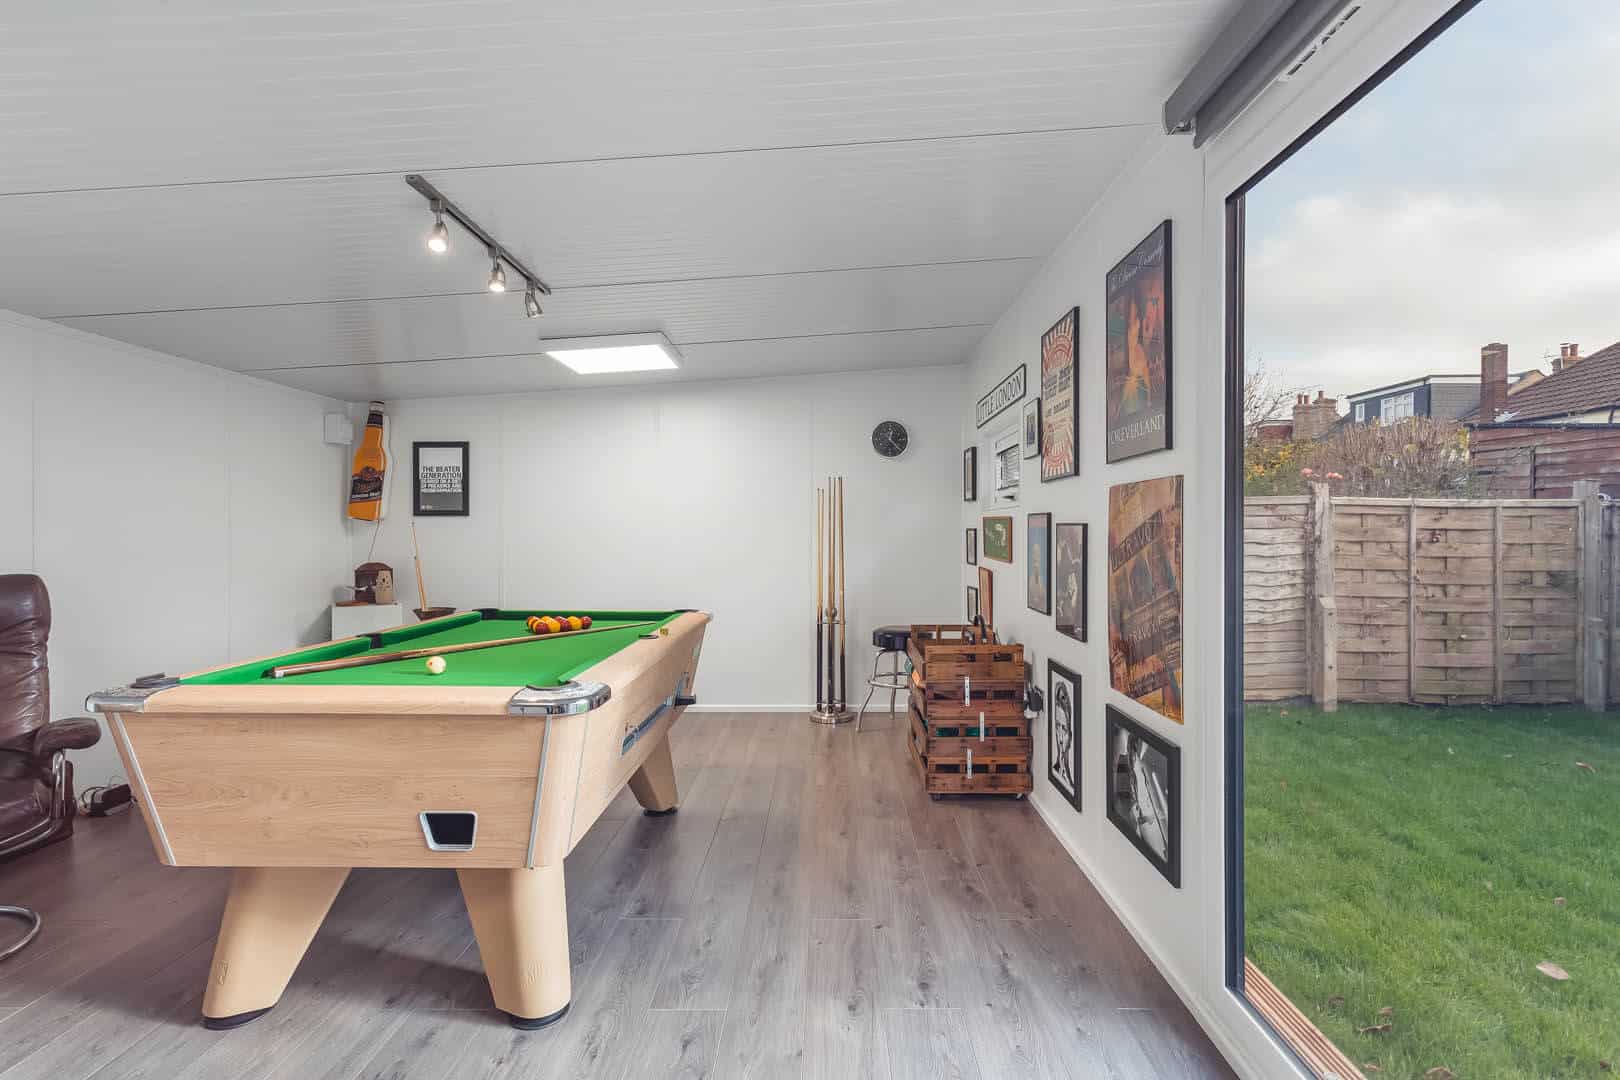 Pool table with storage and pool cues